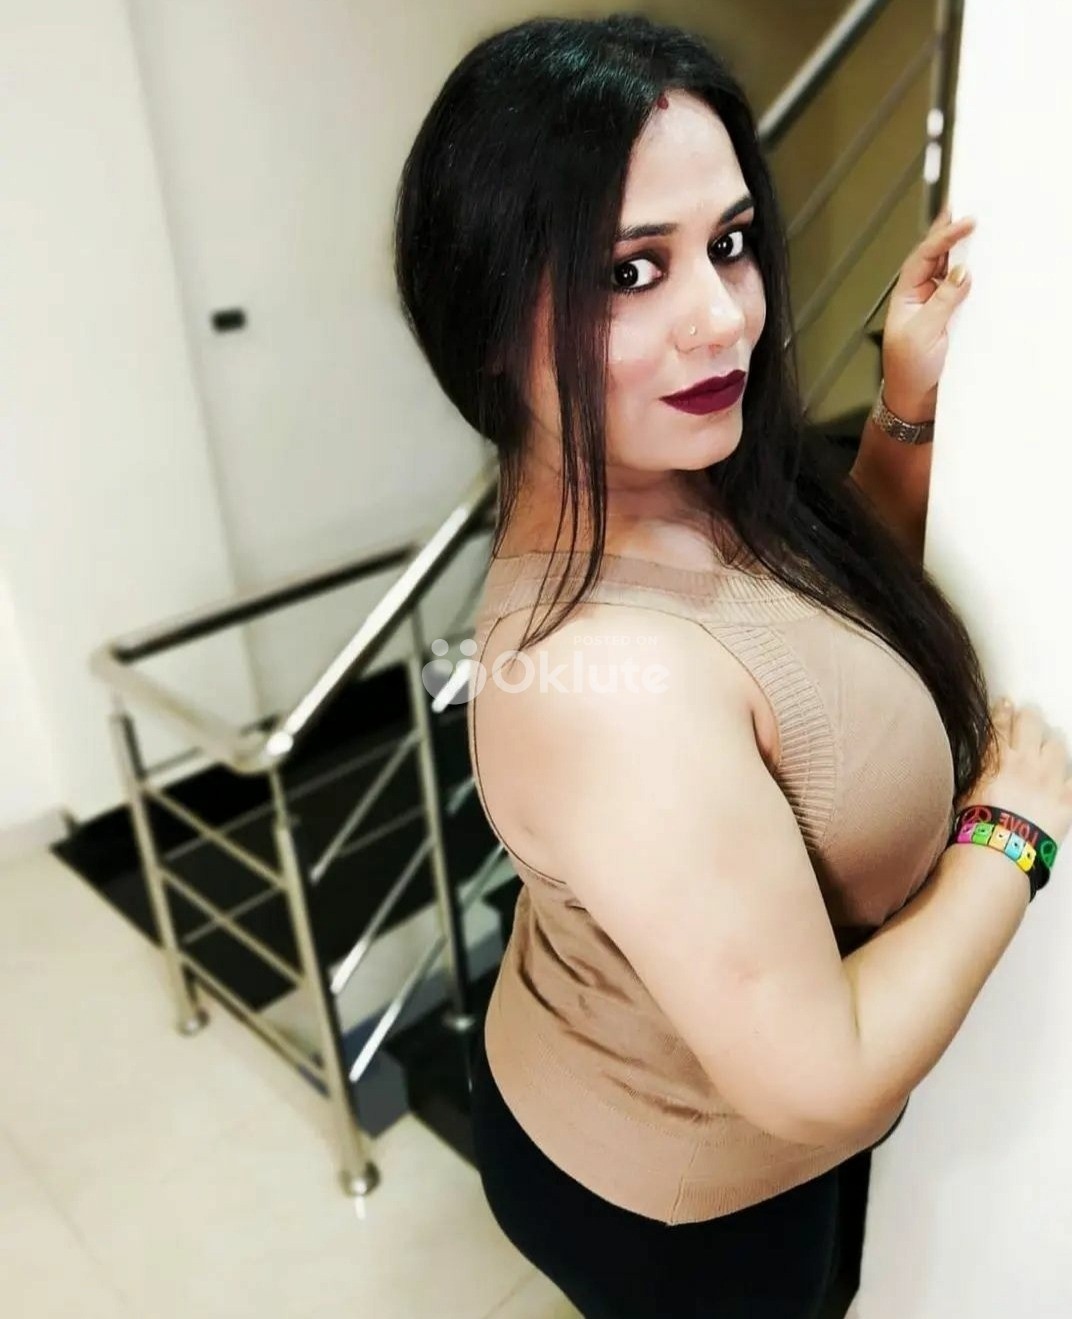 Hyderabadsexy collage girl available full enjoyment unlimited shot 